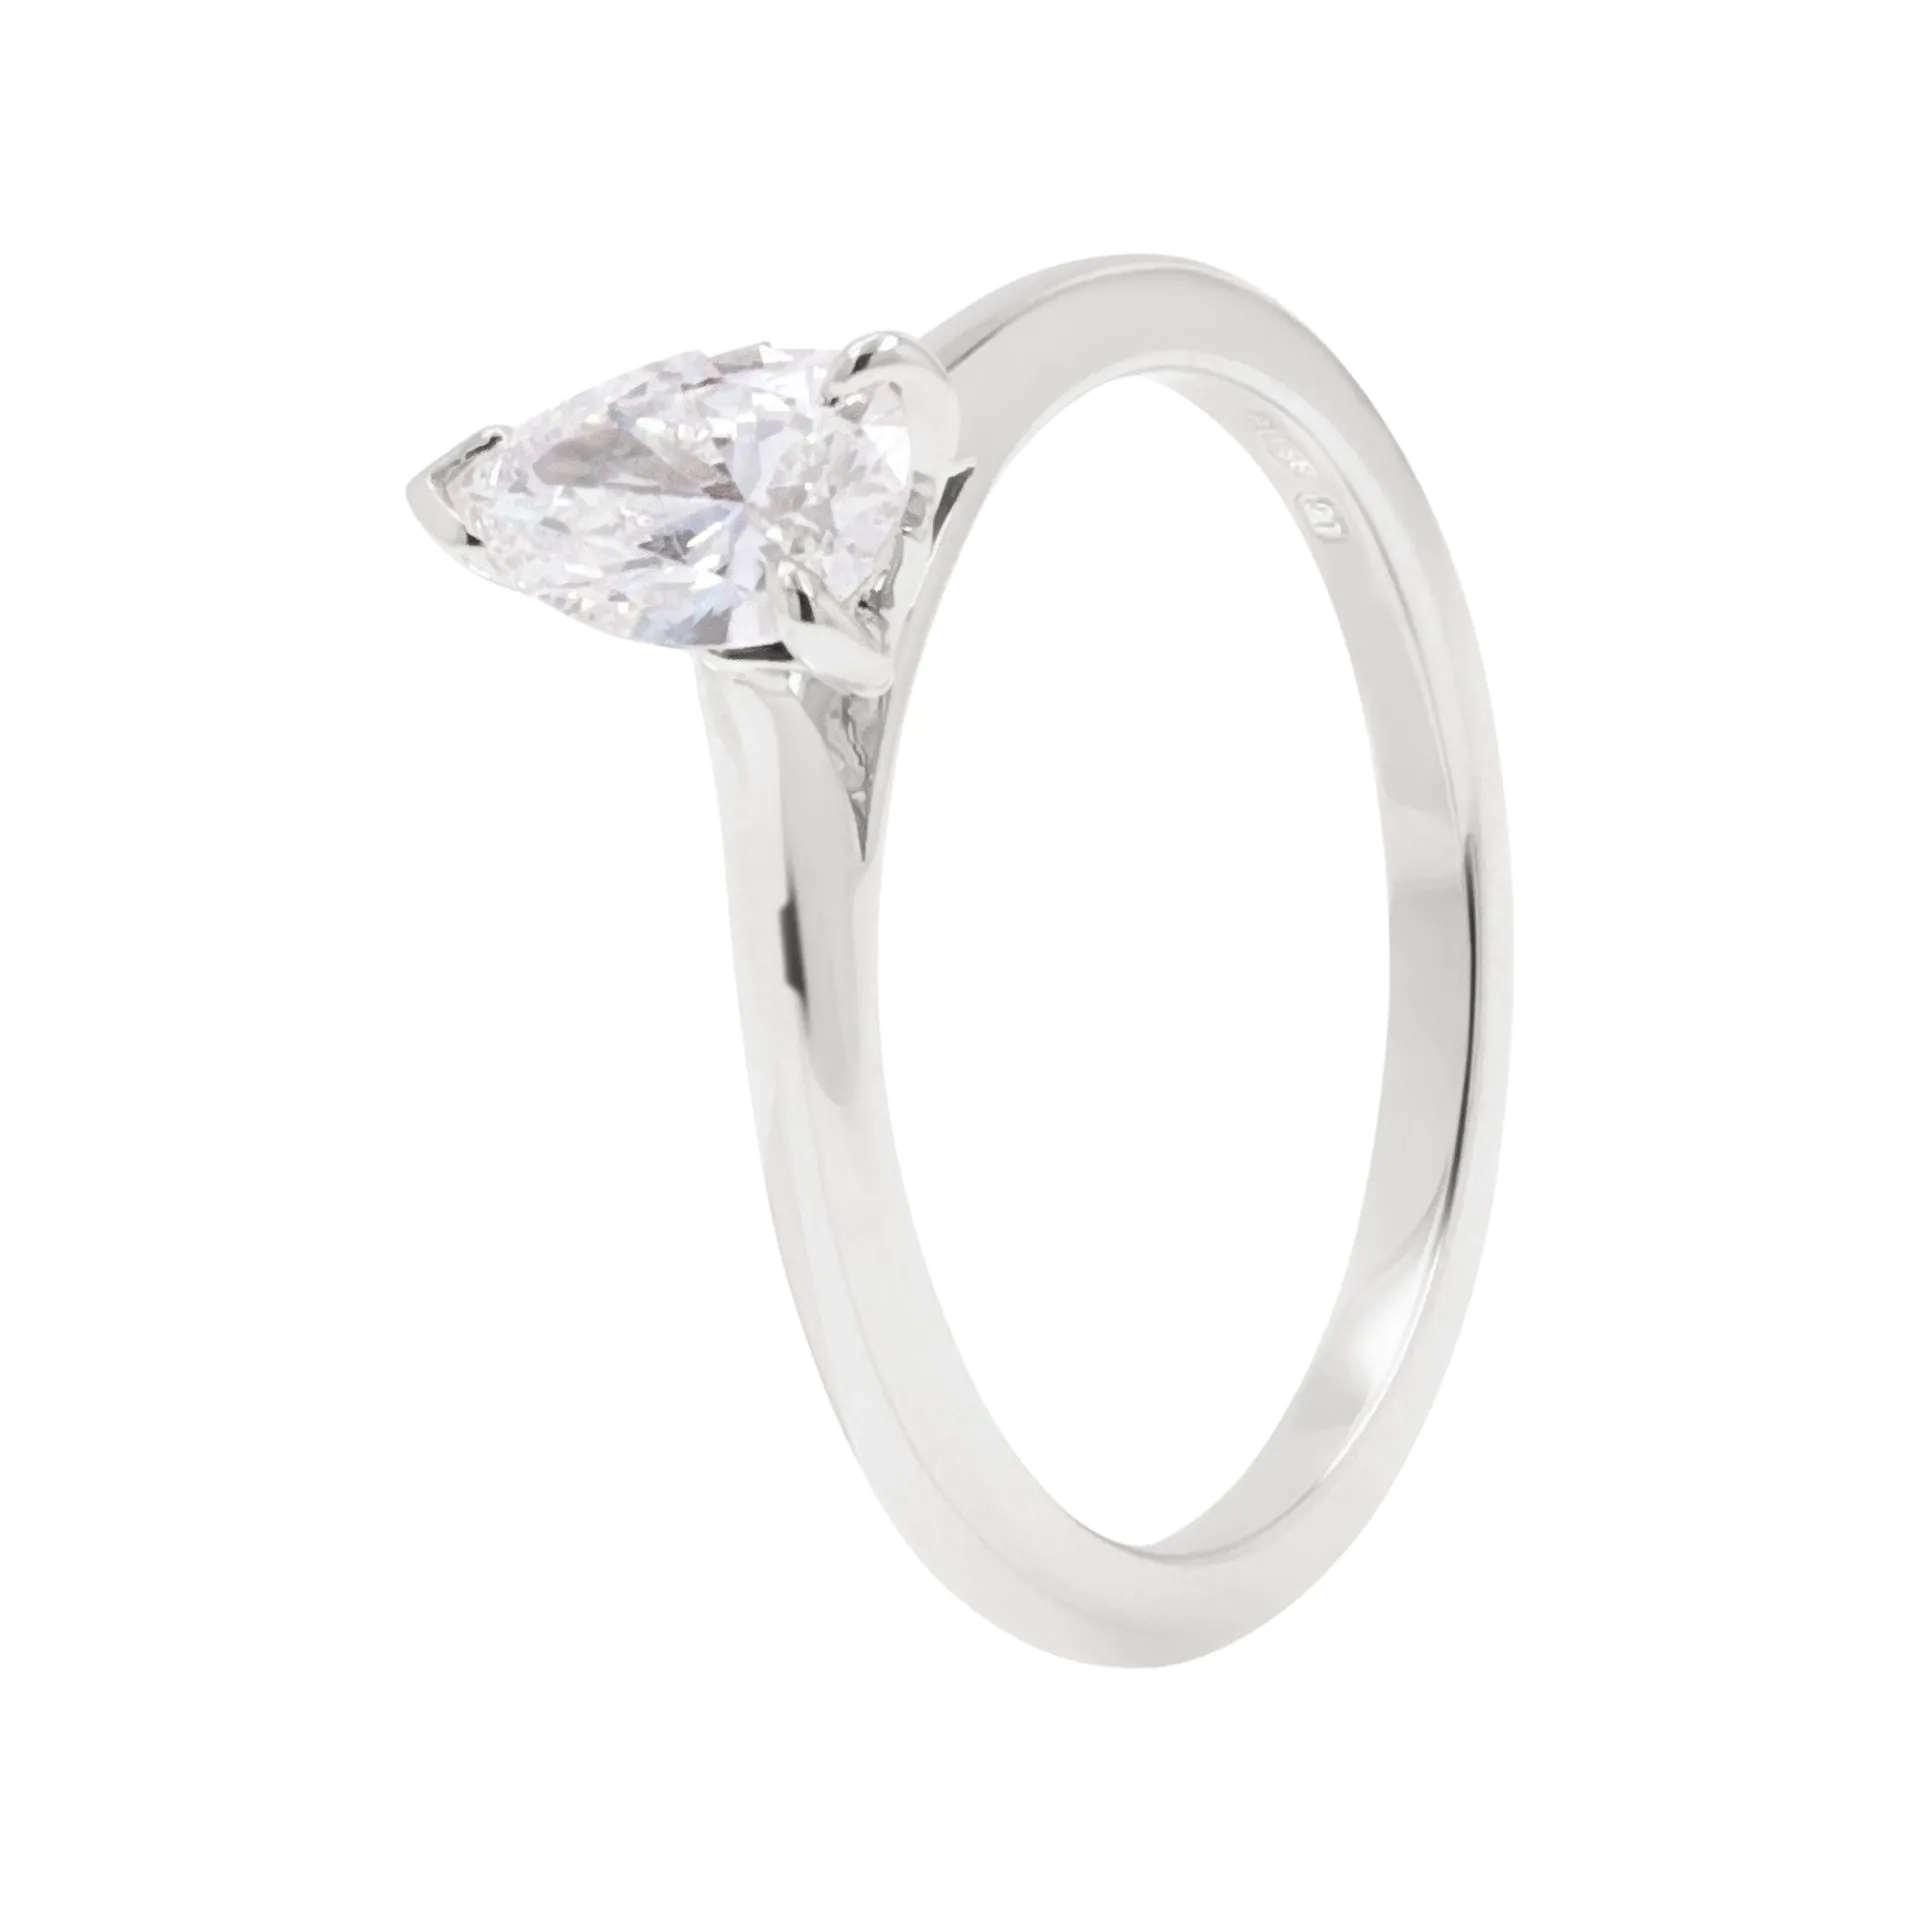 Wendy Platinum 0.54ct Pear Cut Diamond Solitaire Ring